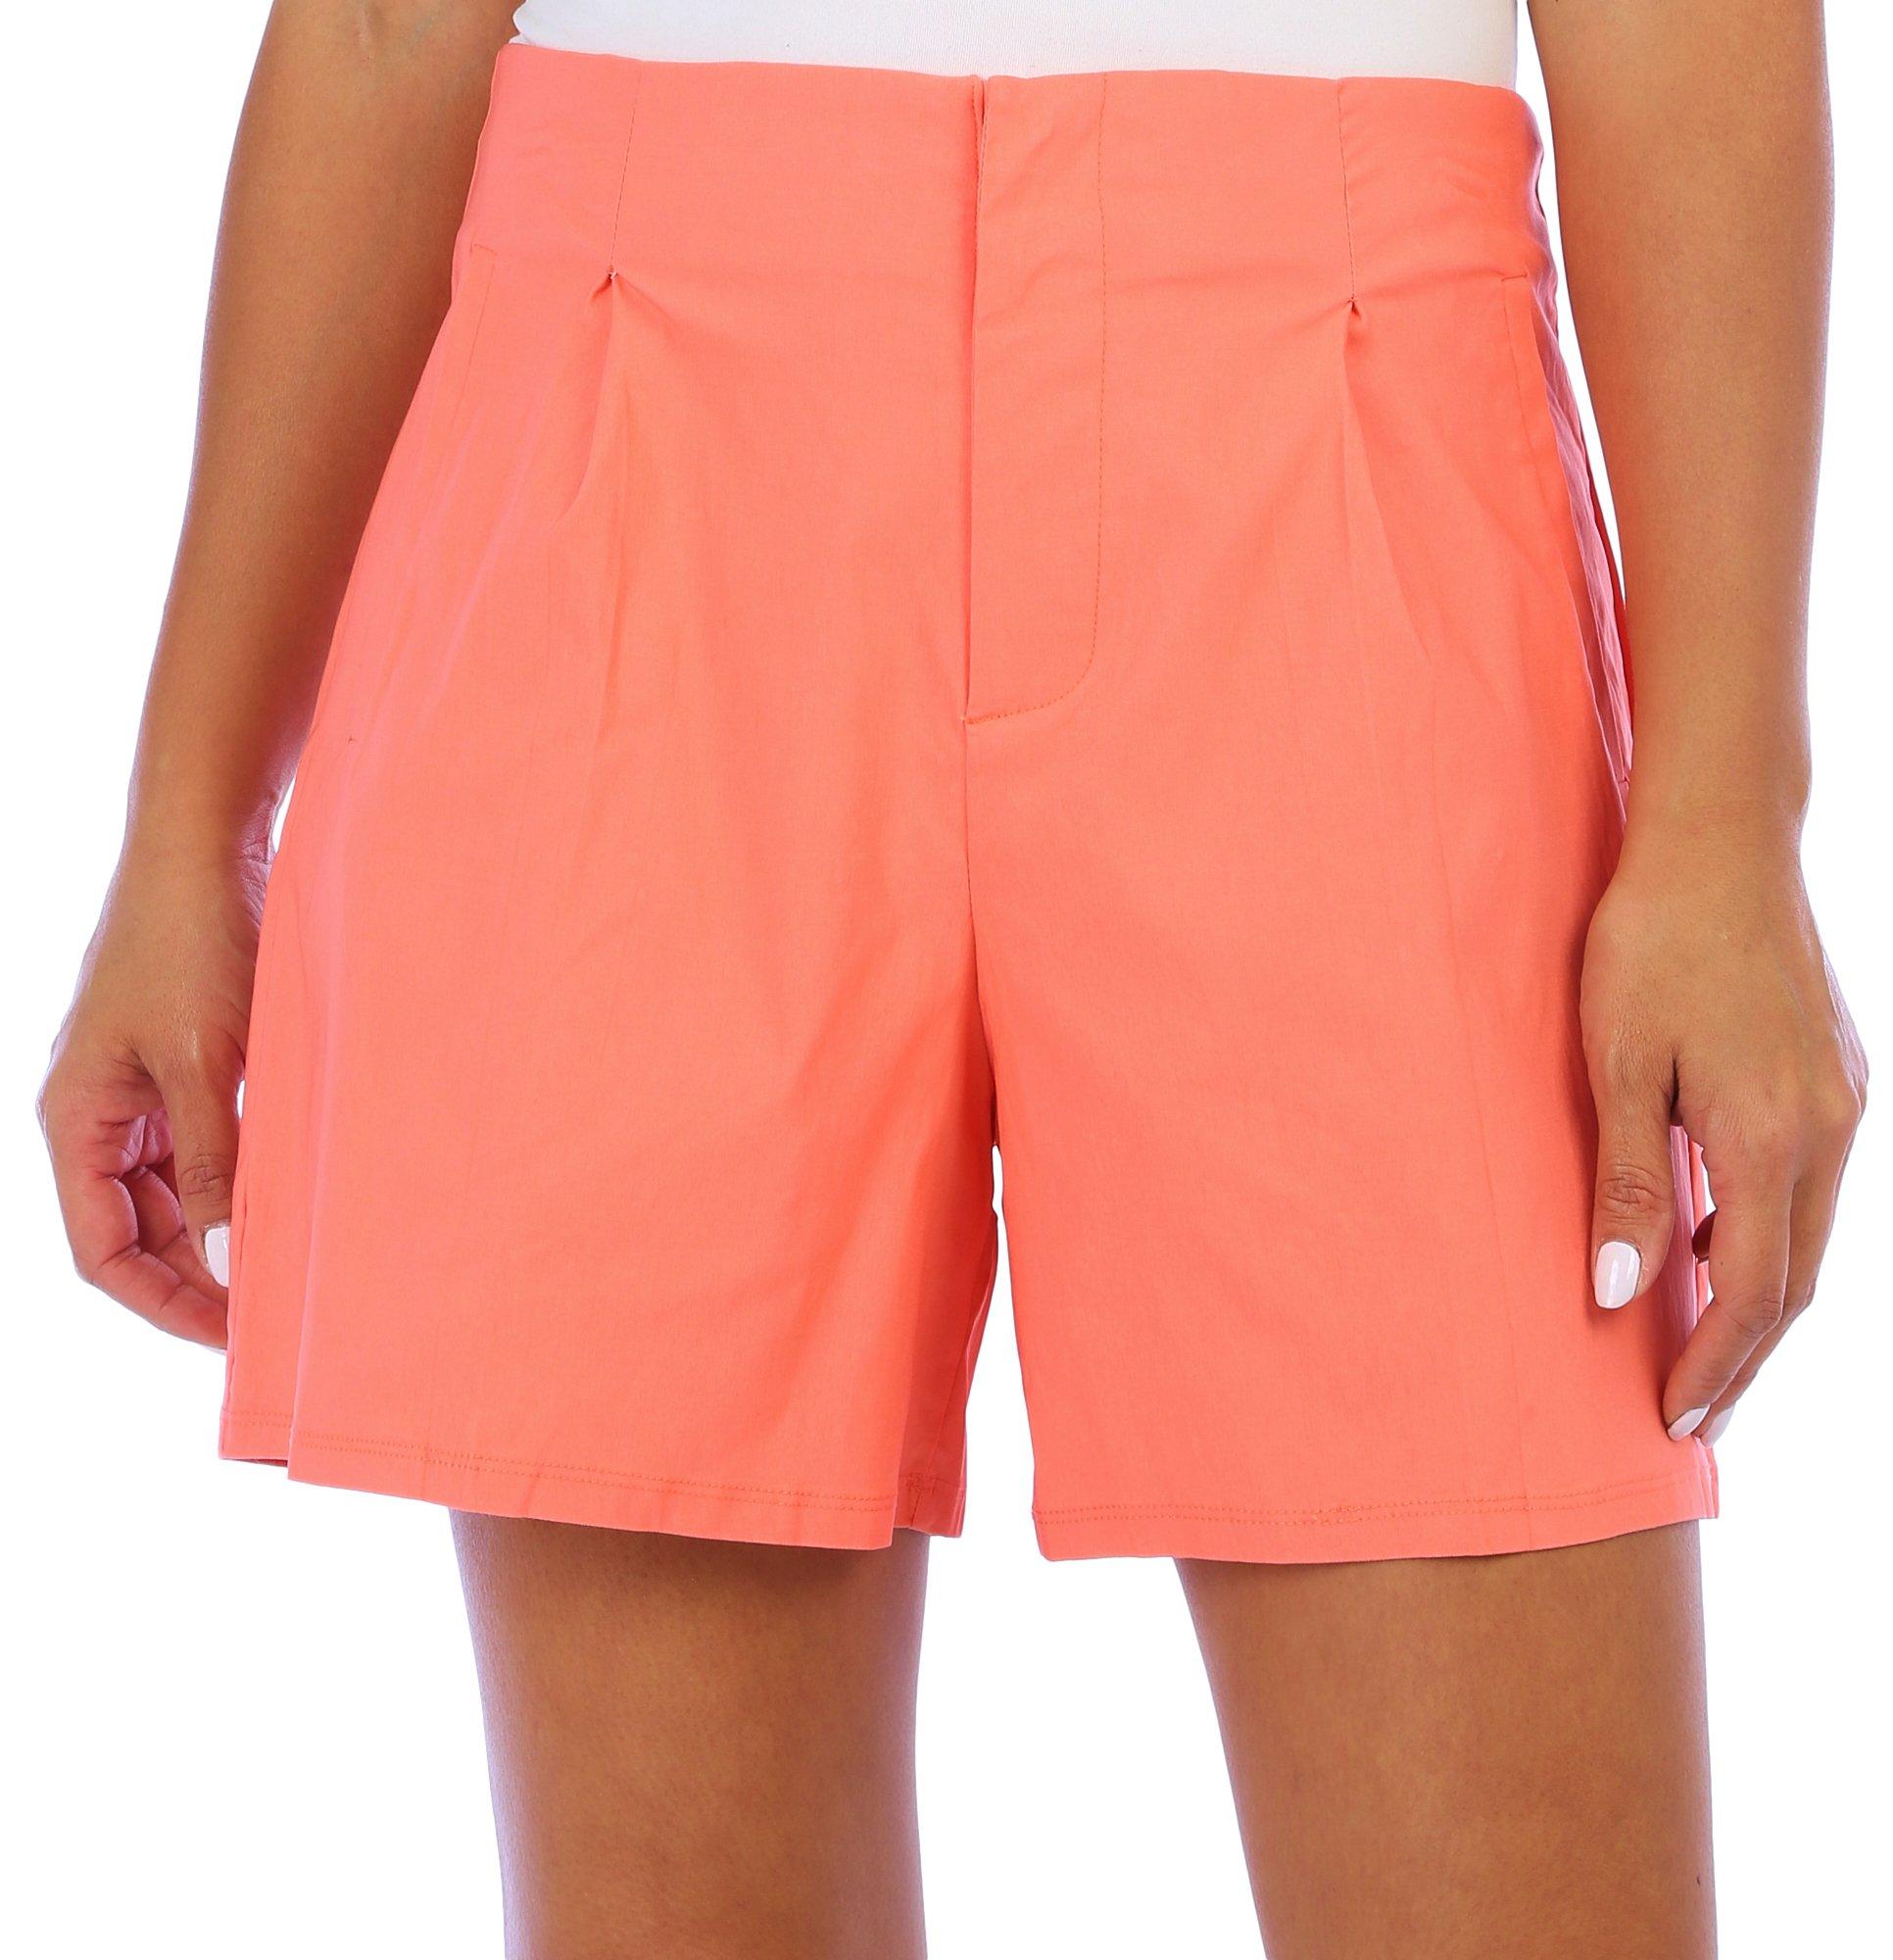 Blue Sol Womens Pleated Faux Pocket Shorts